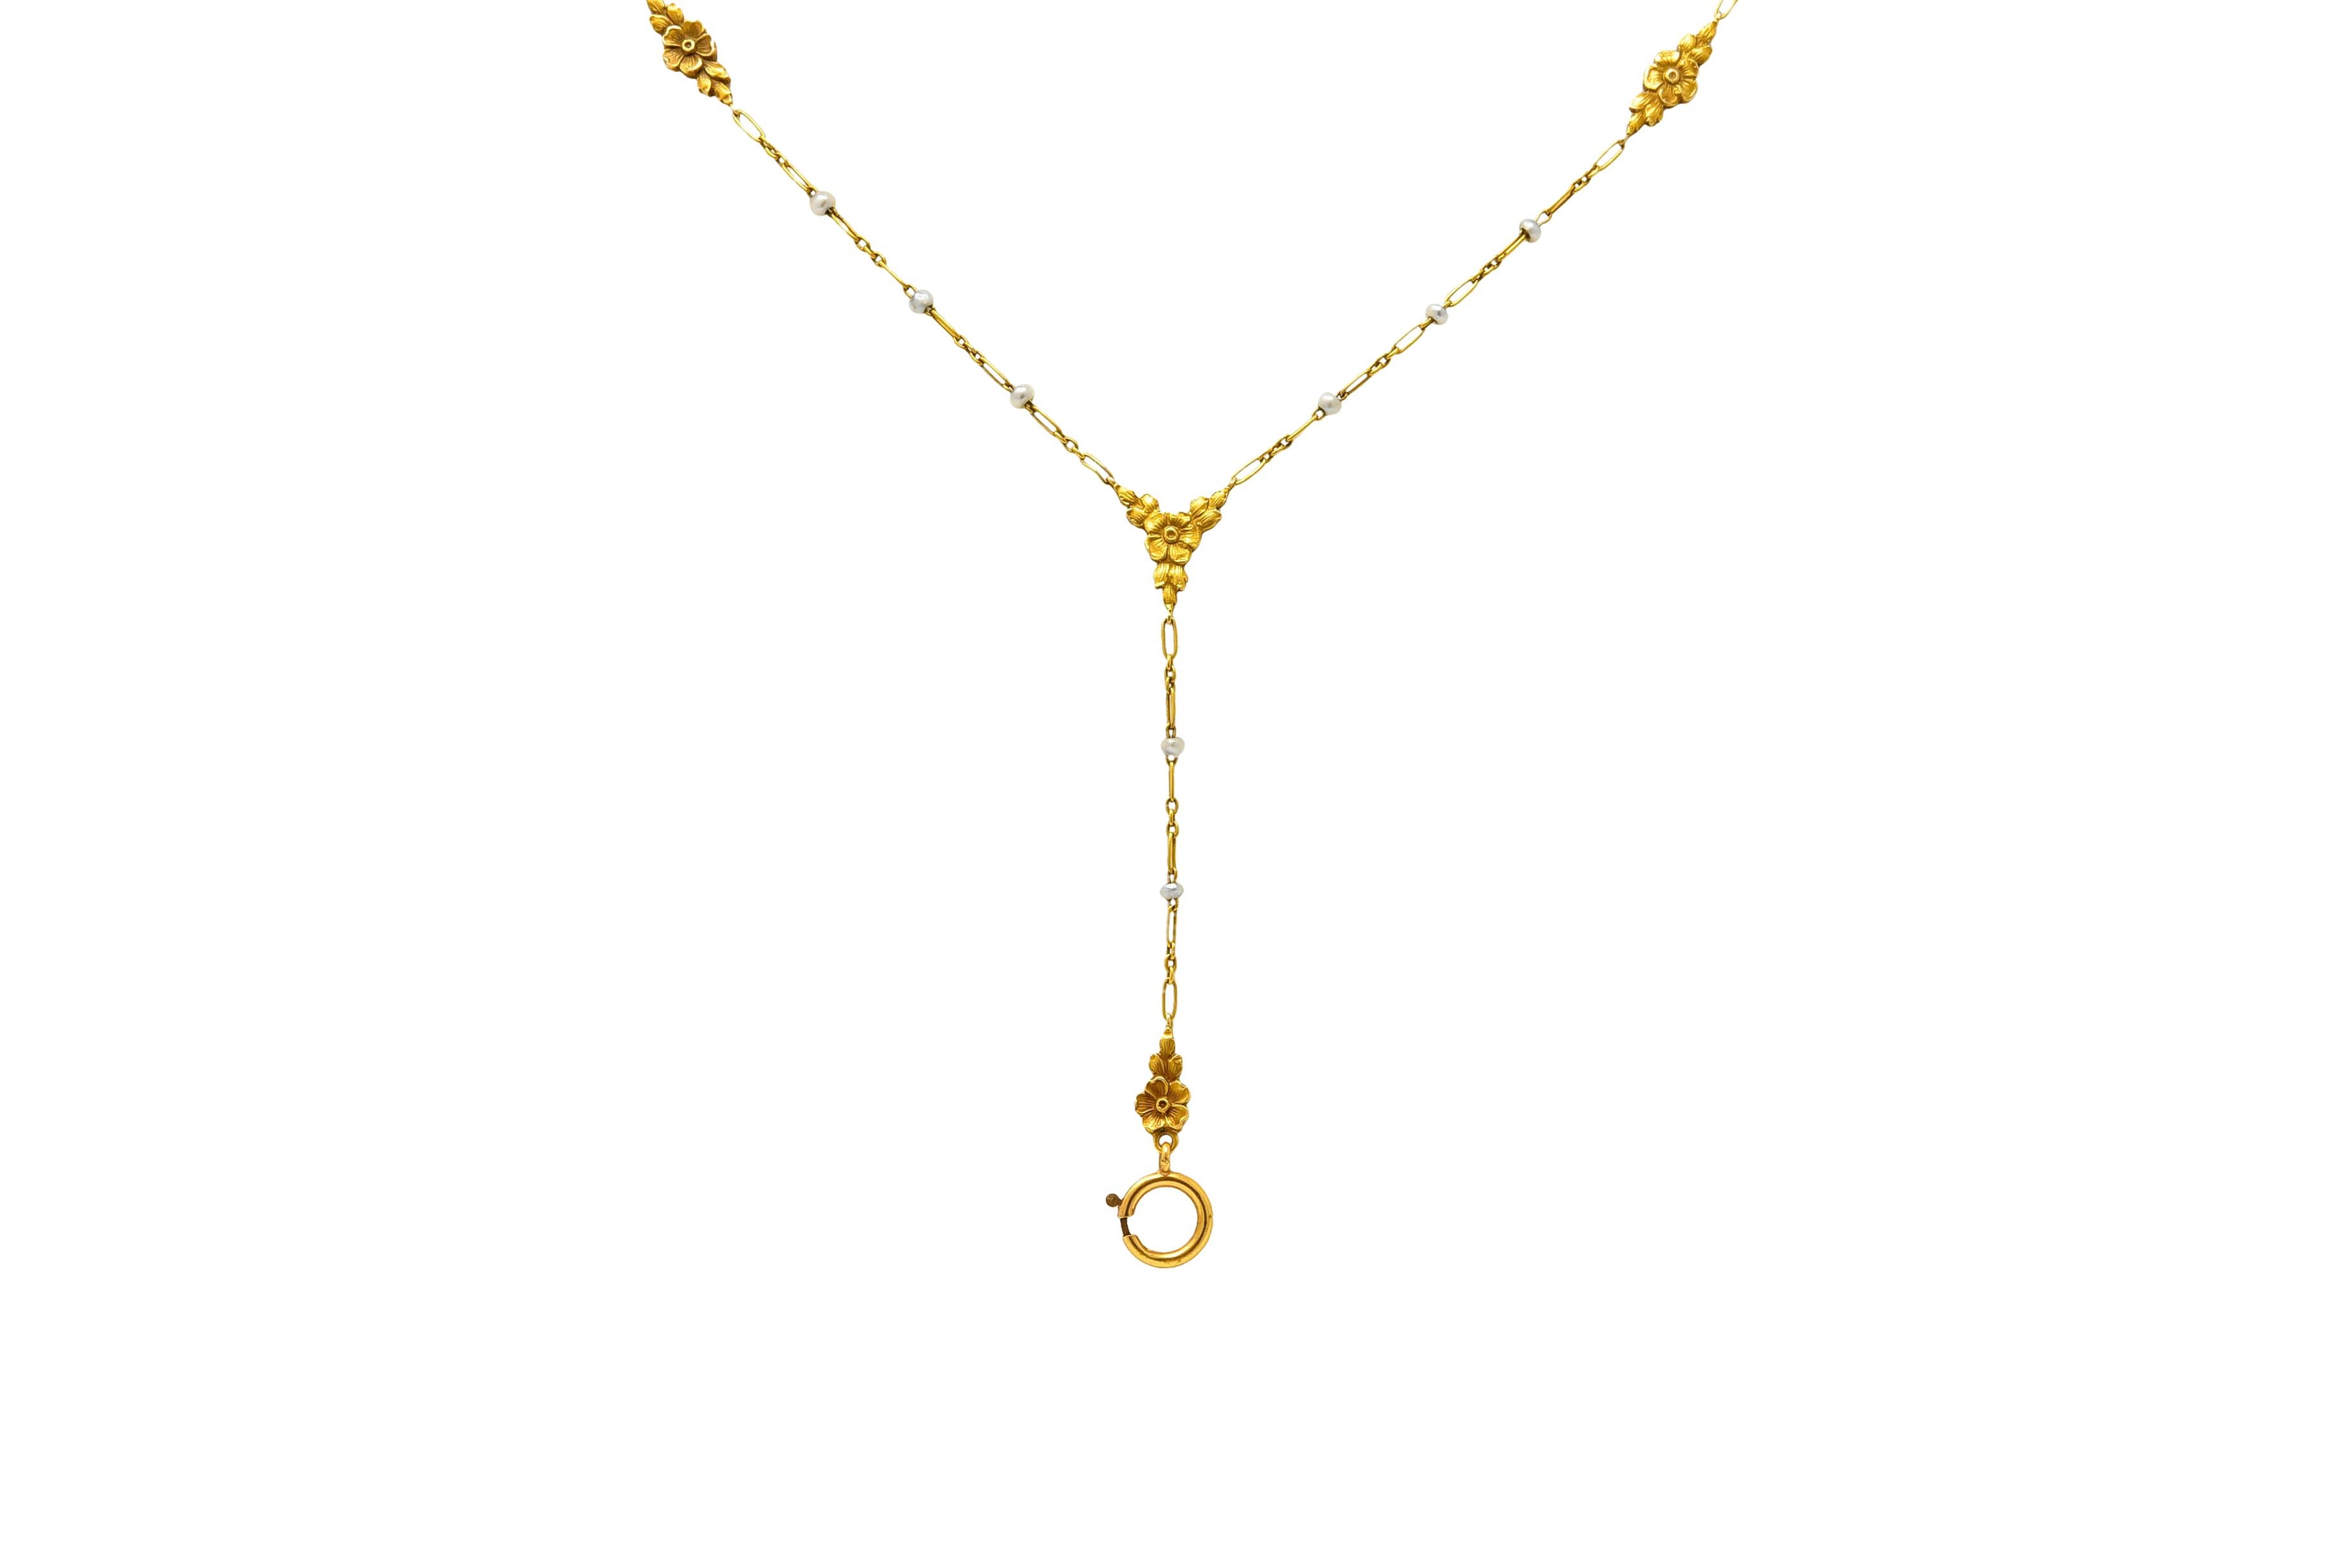 Lariat style necklace comprised of elongated links with seed pearl accents measuring approximately 2.0 mm, gray in body color and very well matched

With floral stations flanked by leaves throughout, matte gold with engraved lines for